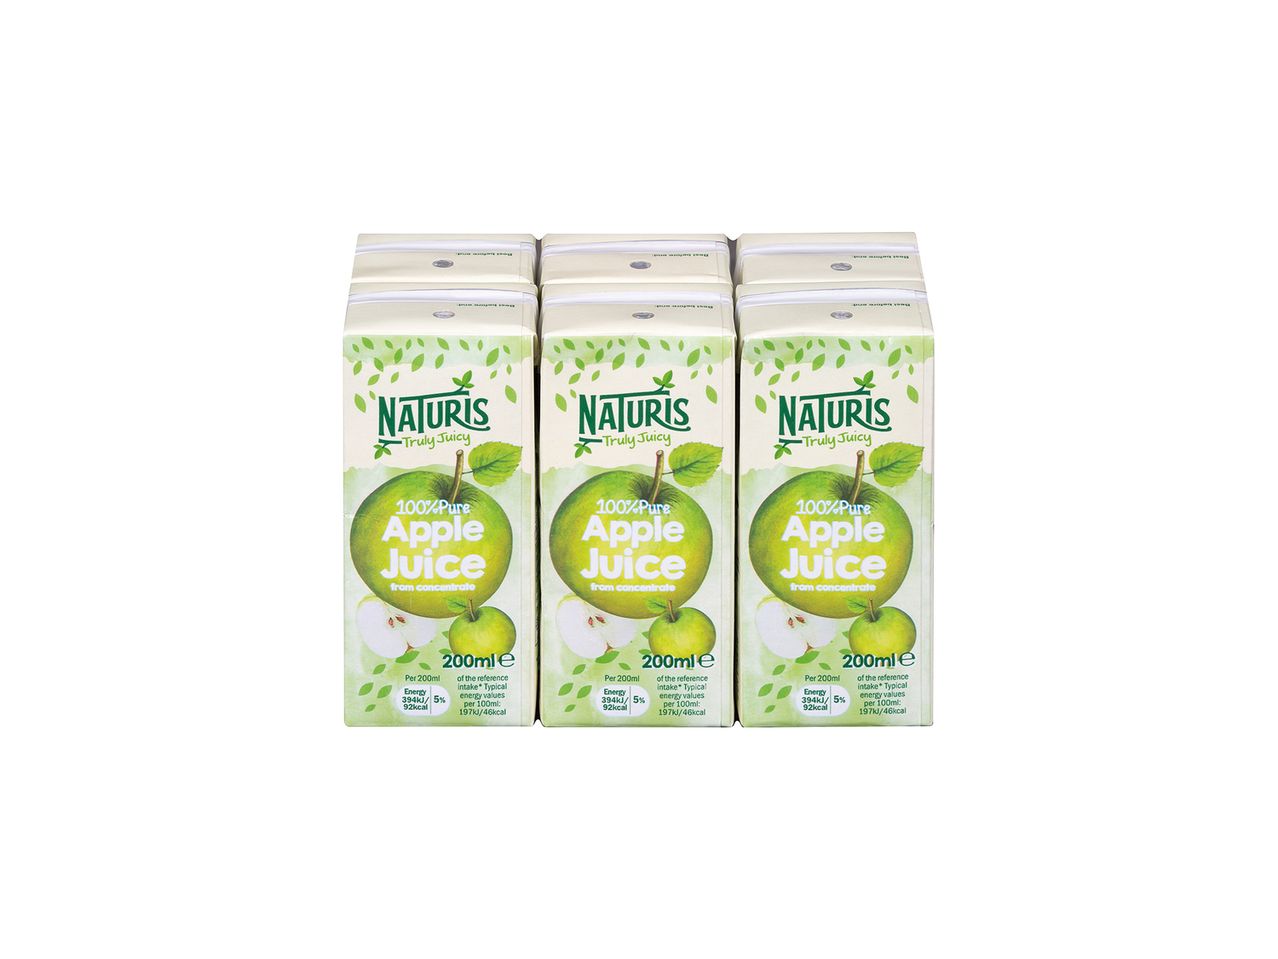 Go to full screen view: Naturis Apple Juice from Concentrate - Image 1